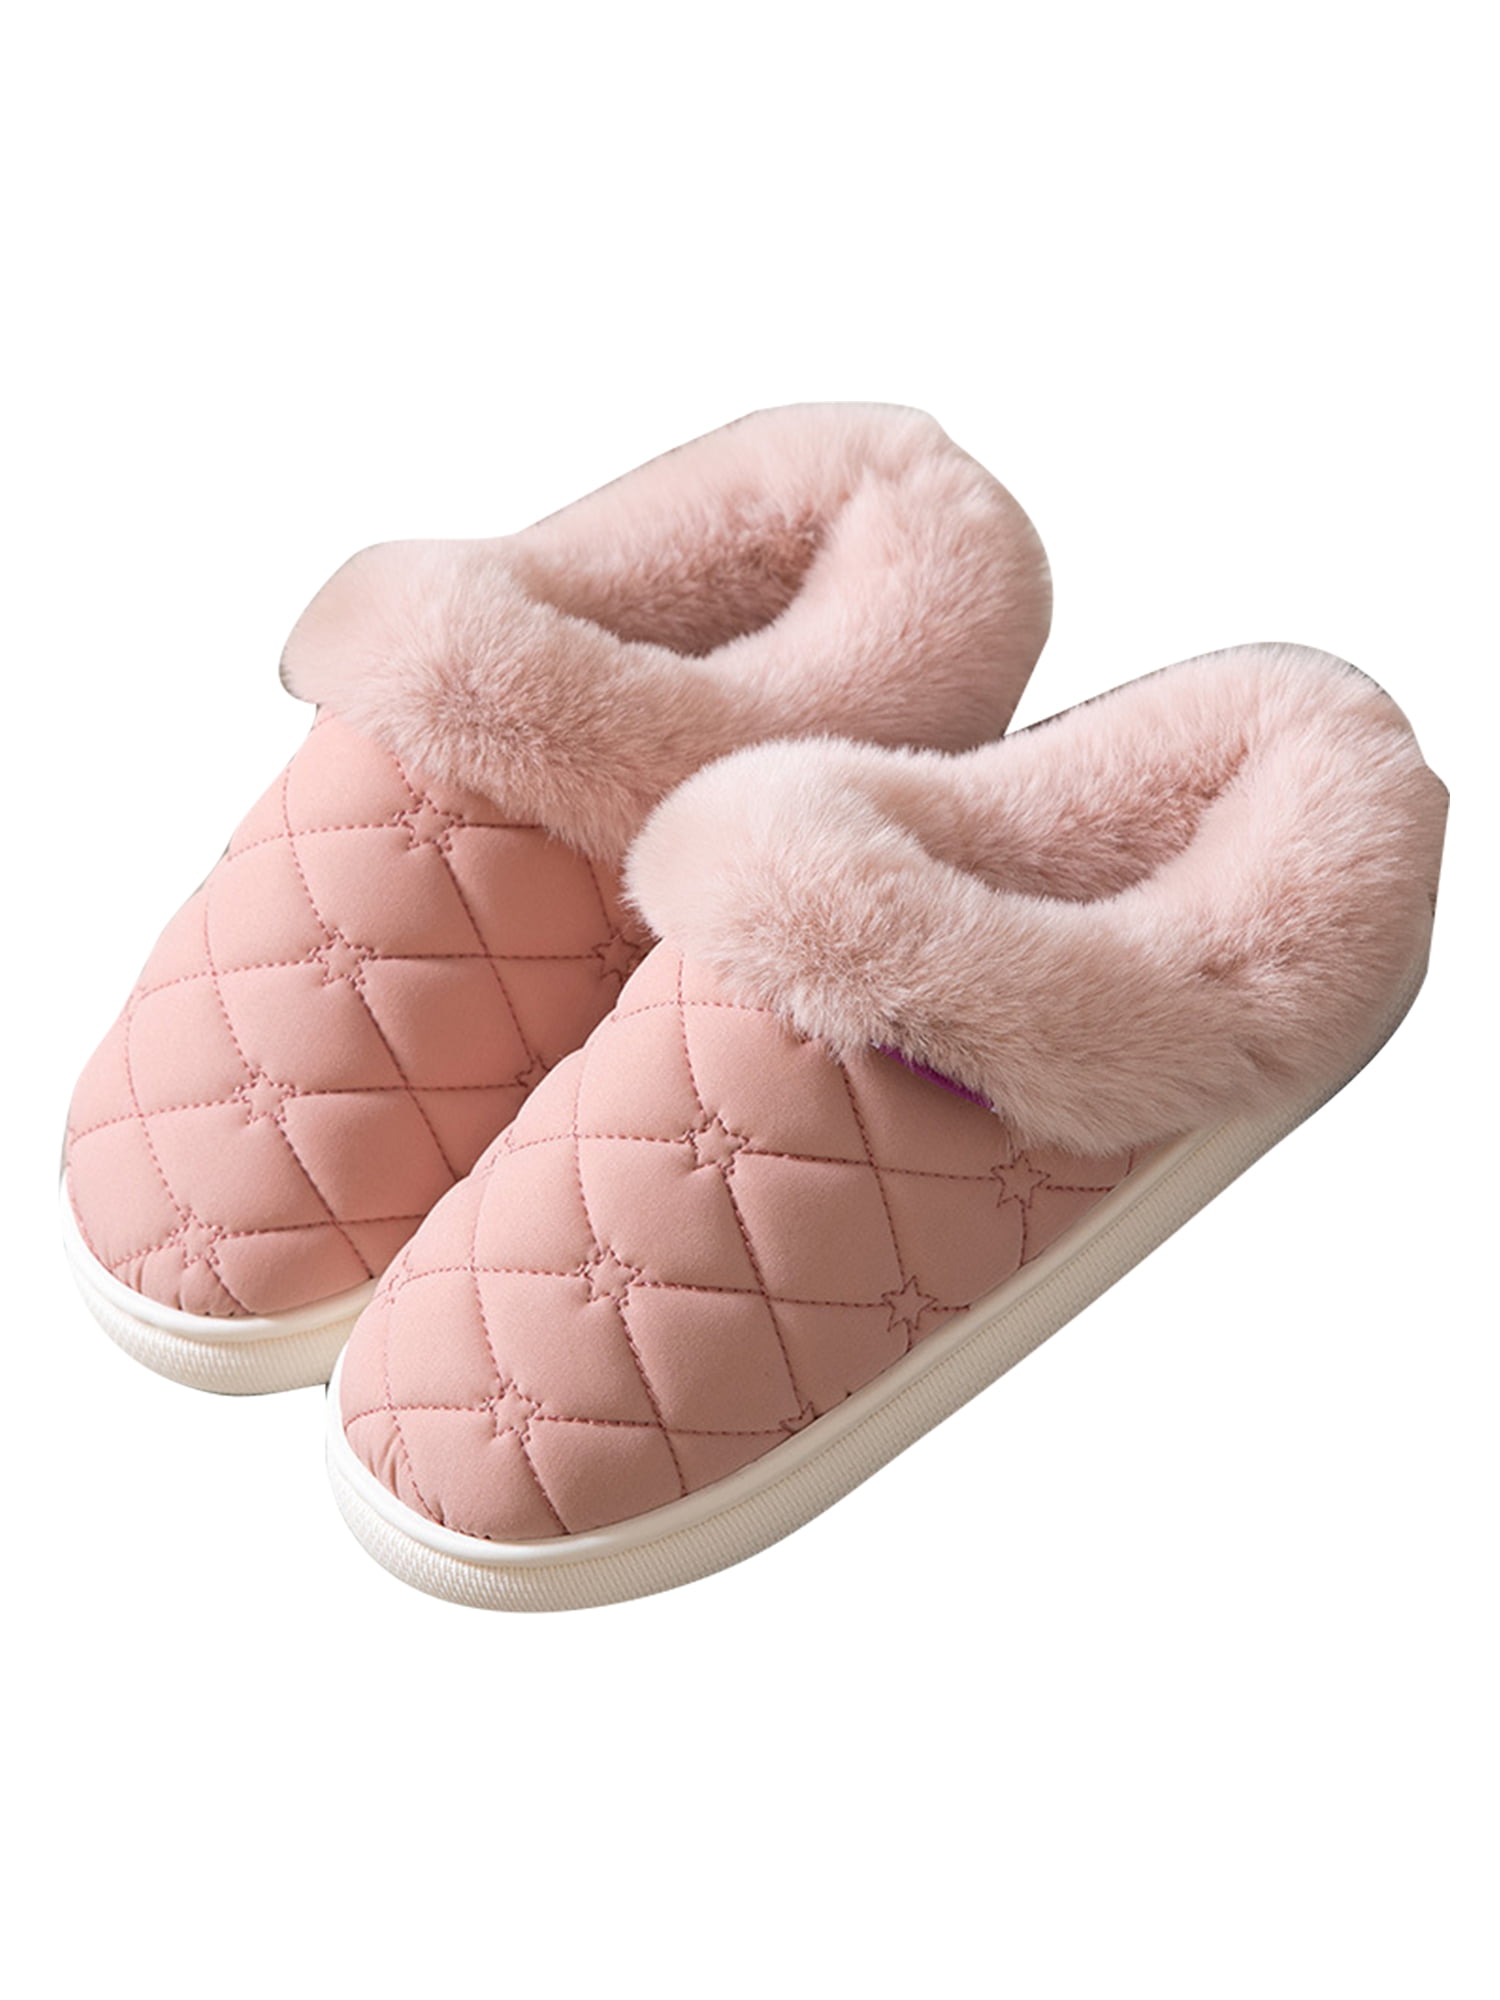 Avamo Womens House Shoes Slip On Slippers Fluffy Slipper Bedroom Home Shoe  Indoor Casual Fuzzy Pink 7-7.5 